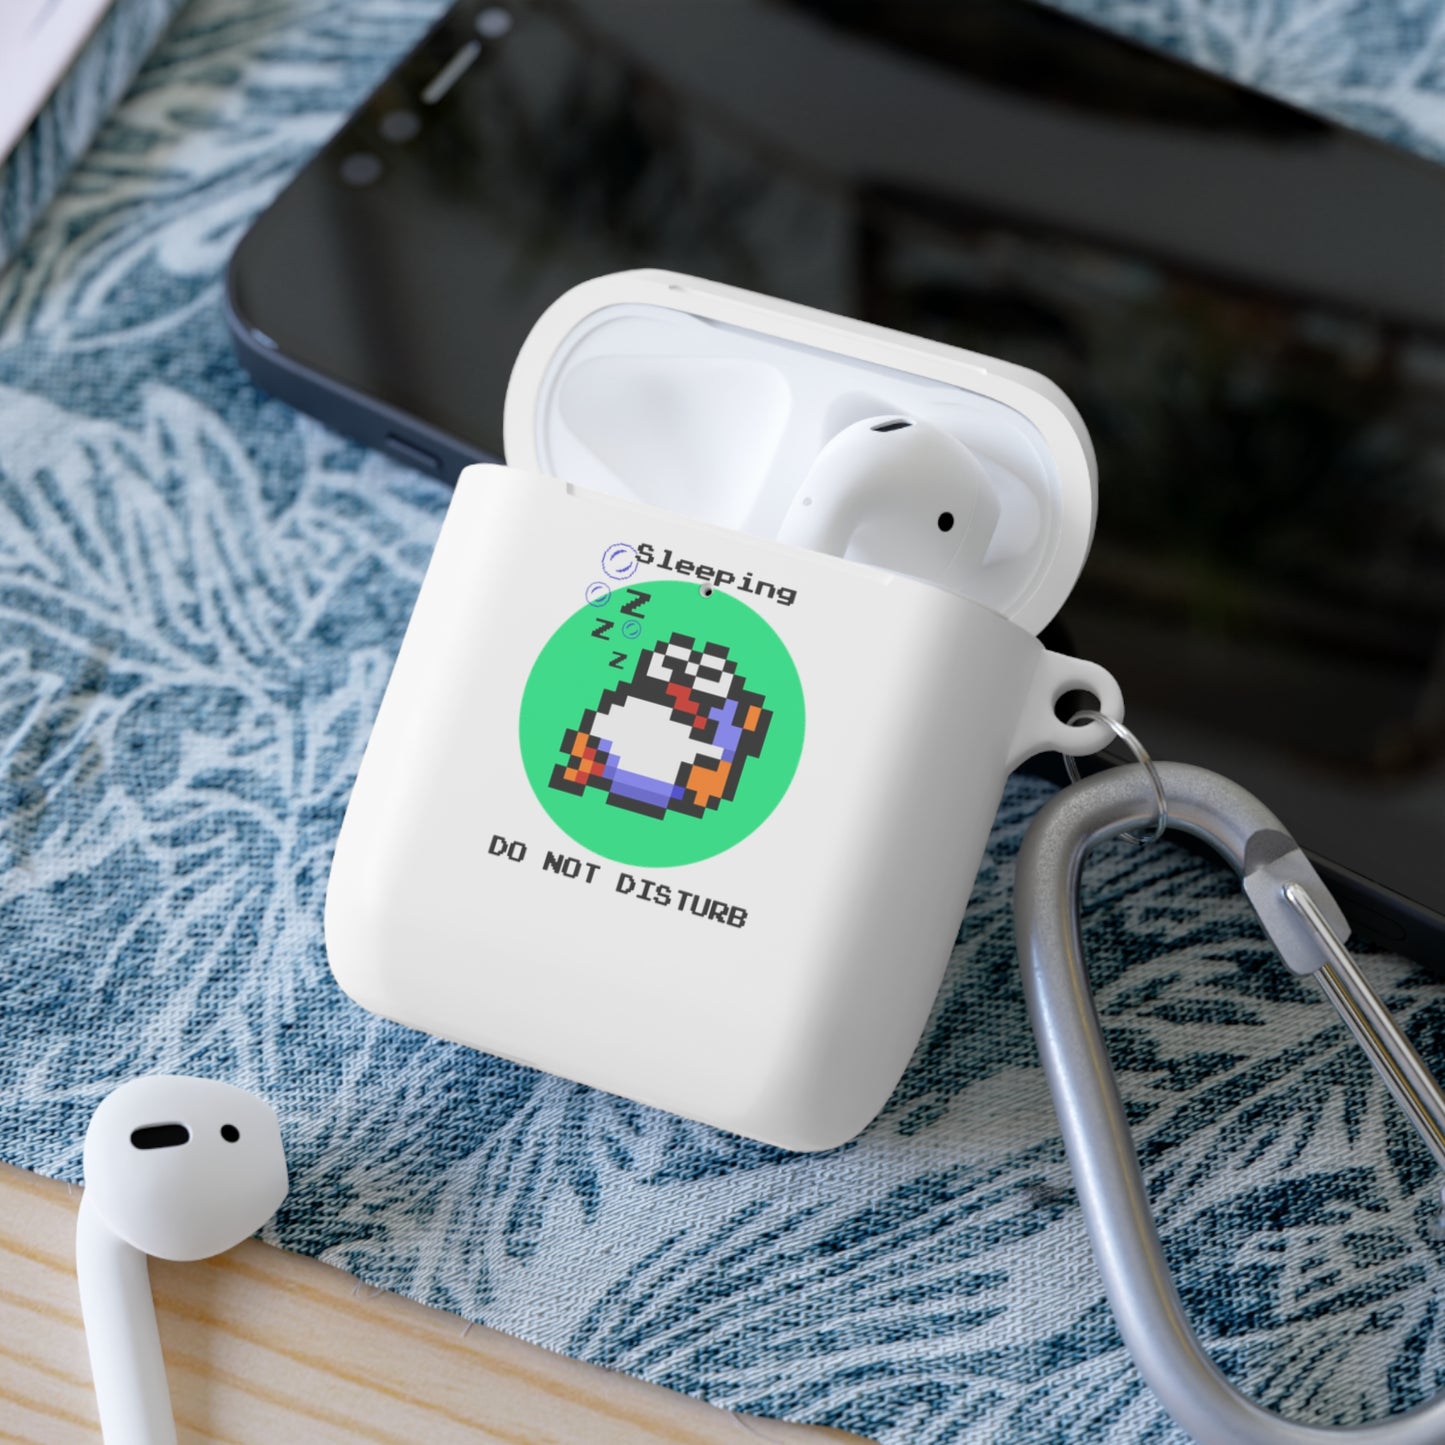 Rip Van Sleeping AirPods / Airpods Pro Case cover